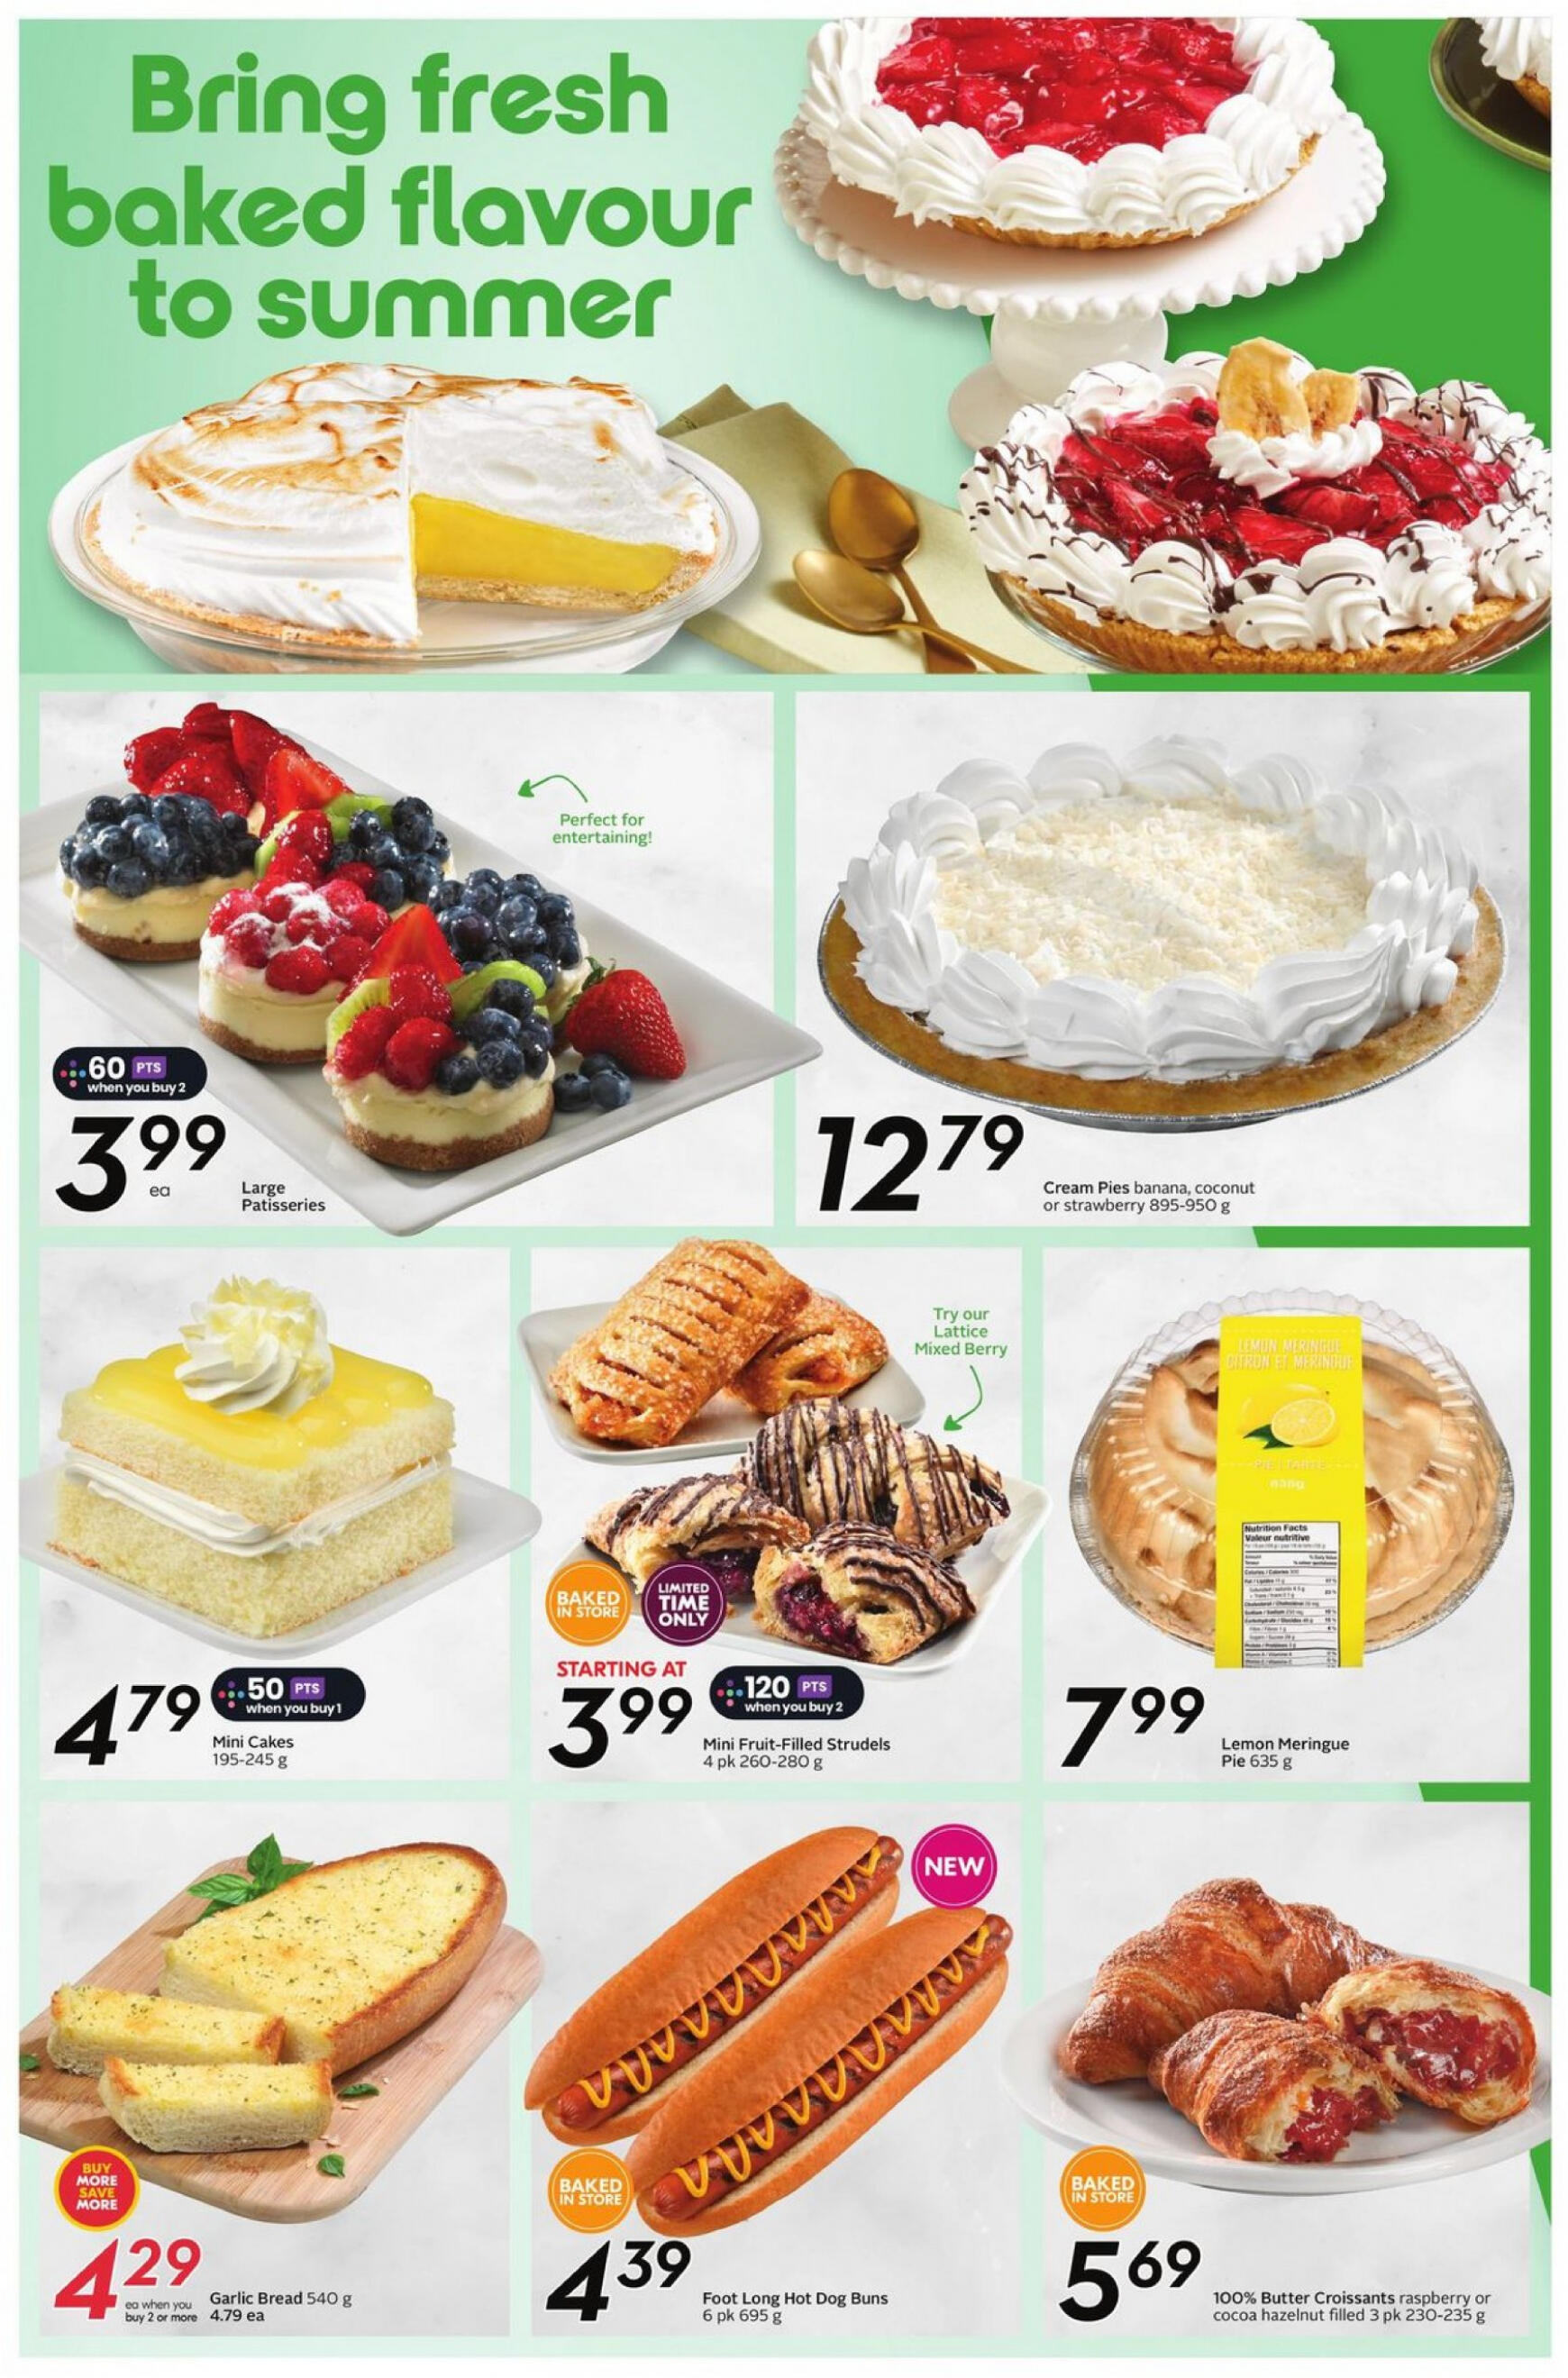 sobeys - Sobeys - Weekly Flyer - Ontario flyer current 23.05. - 29.05. - page: 13